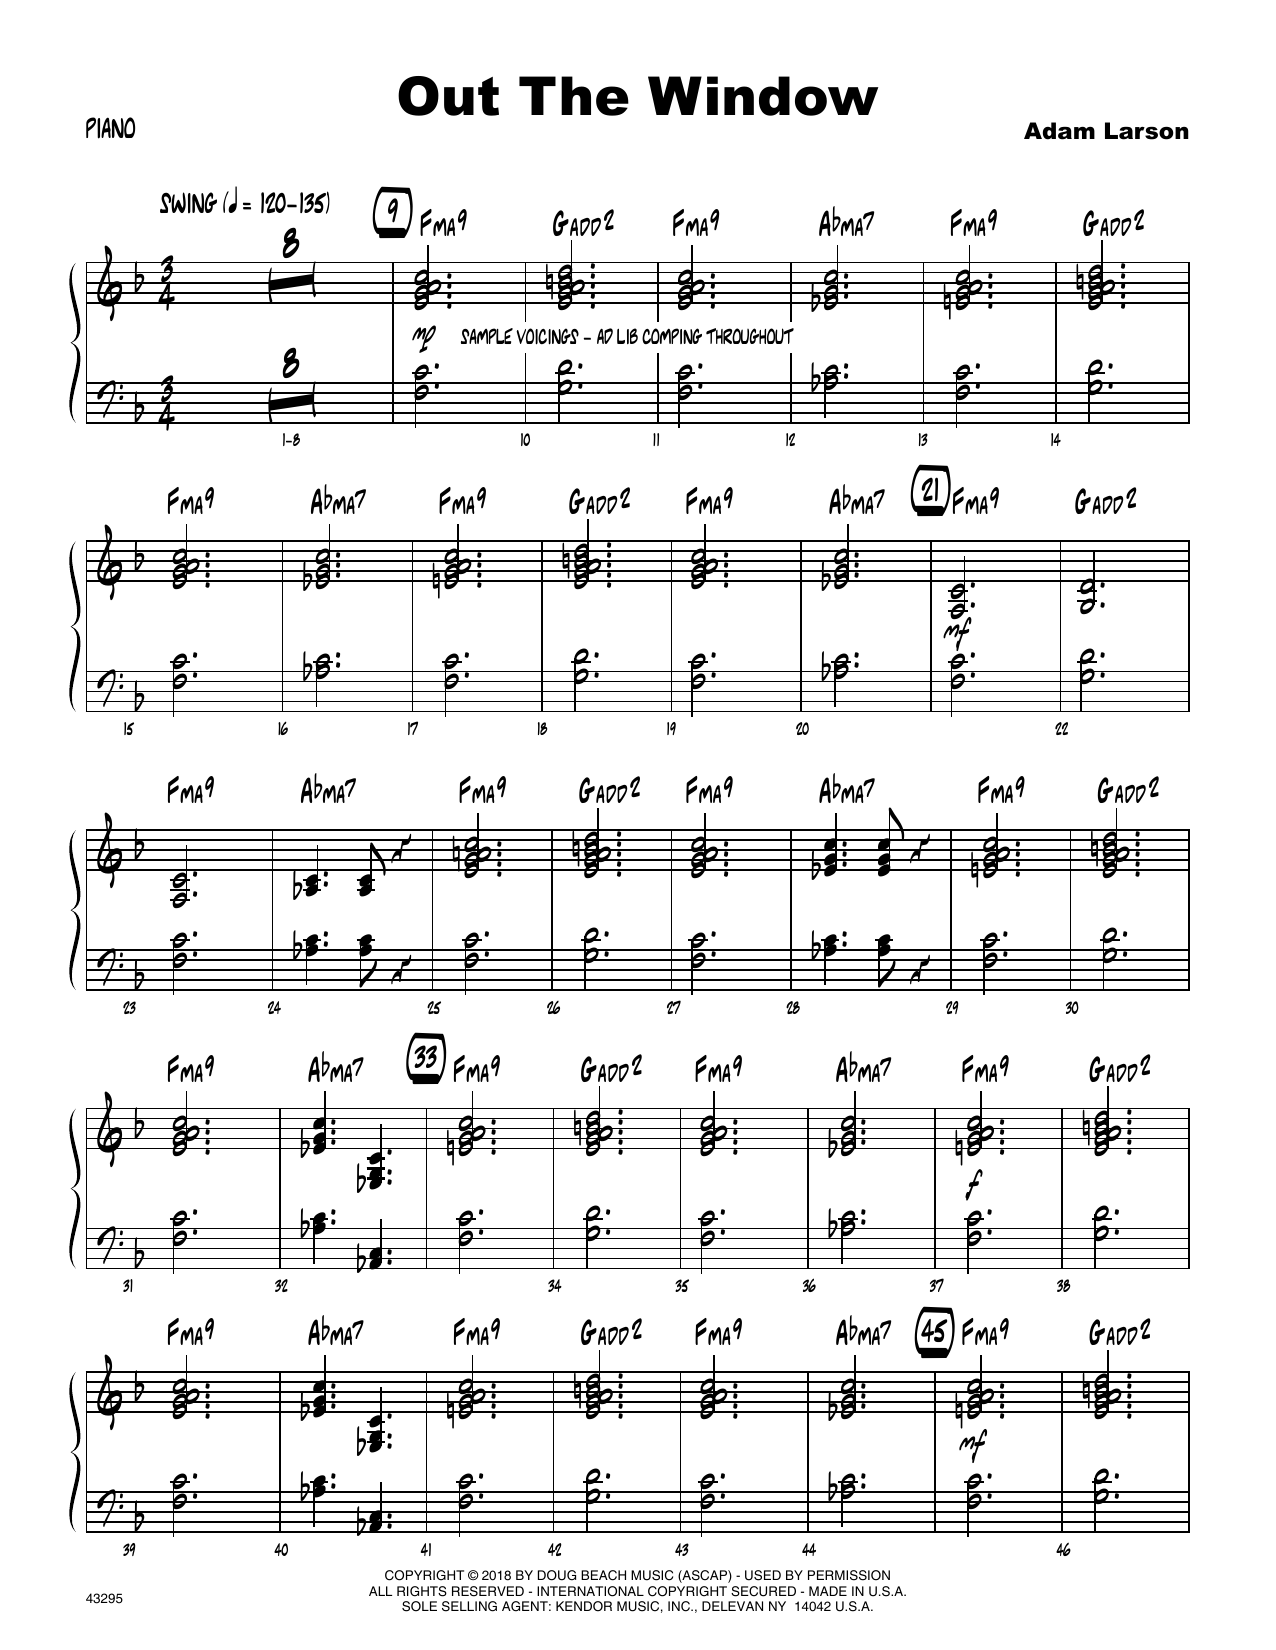 Download Adam Larson Out The Window - Piano Sheet Music